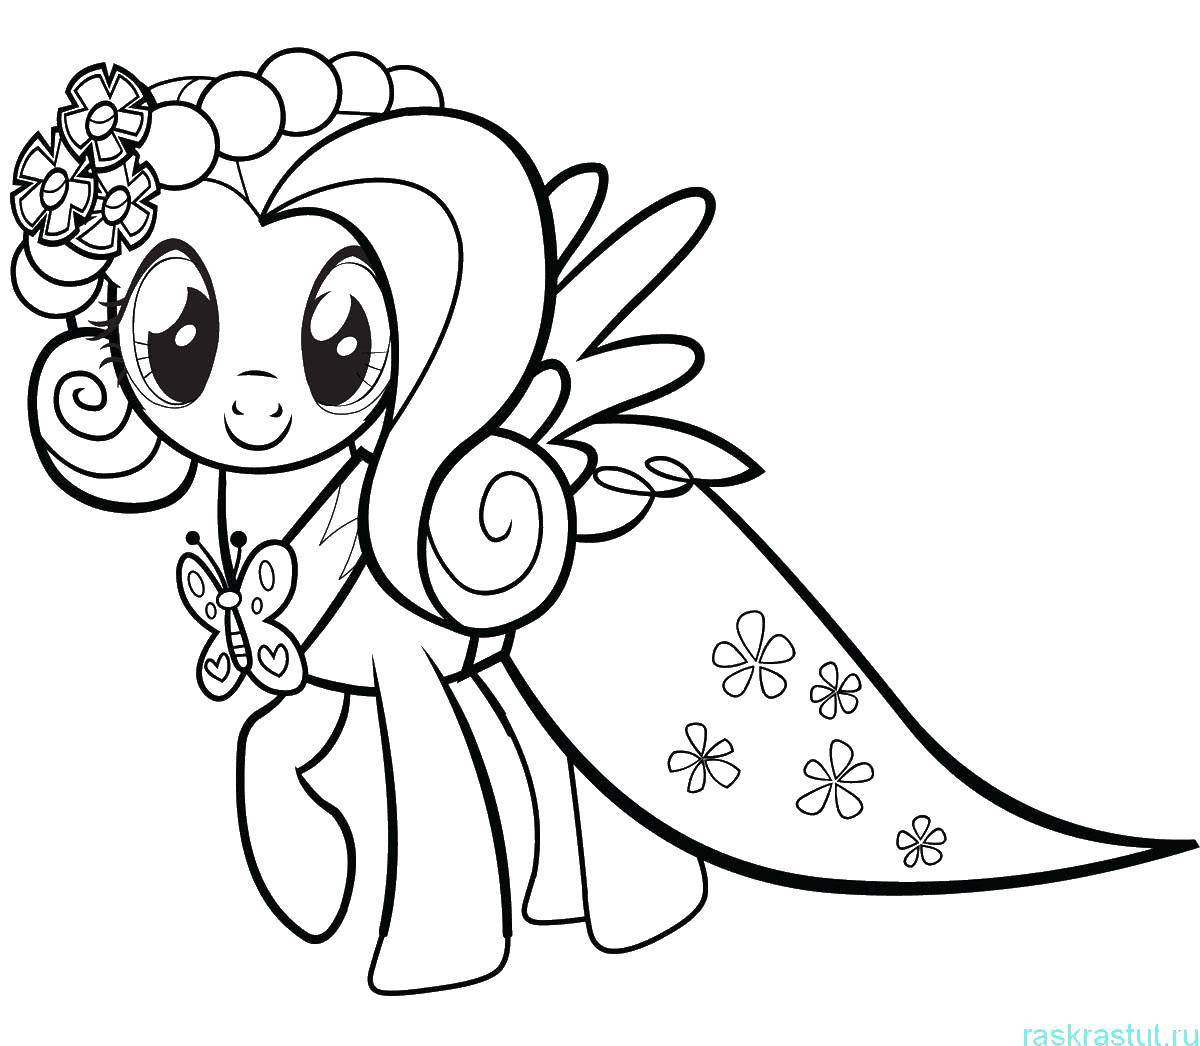 Coloring Fluttershy in dress. Category my little pony. Tags:  ponies.